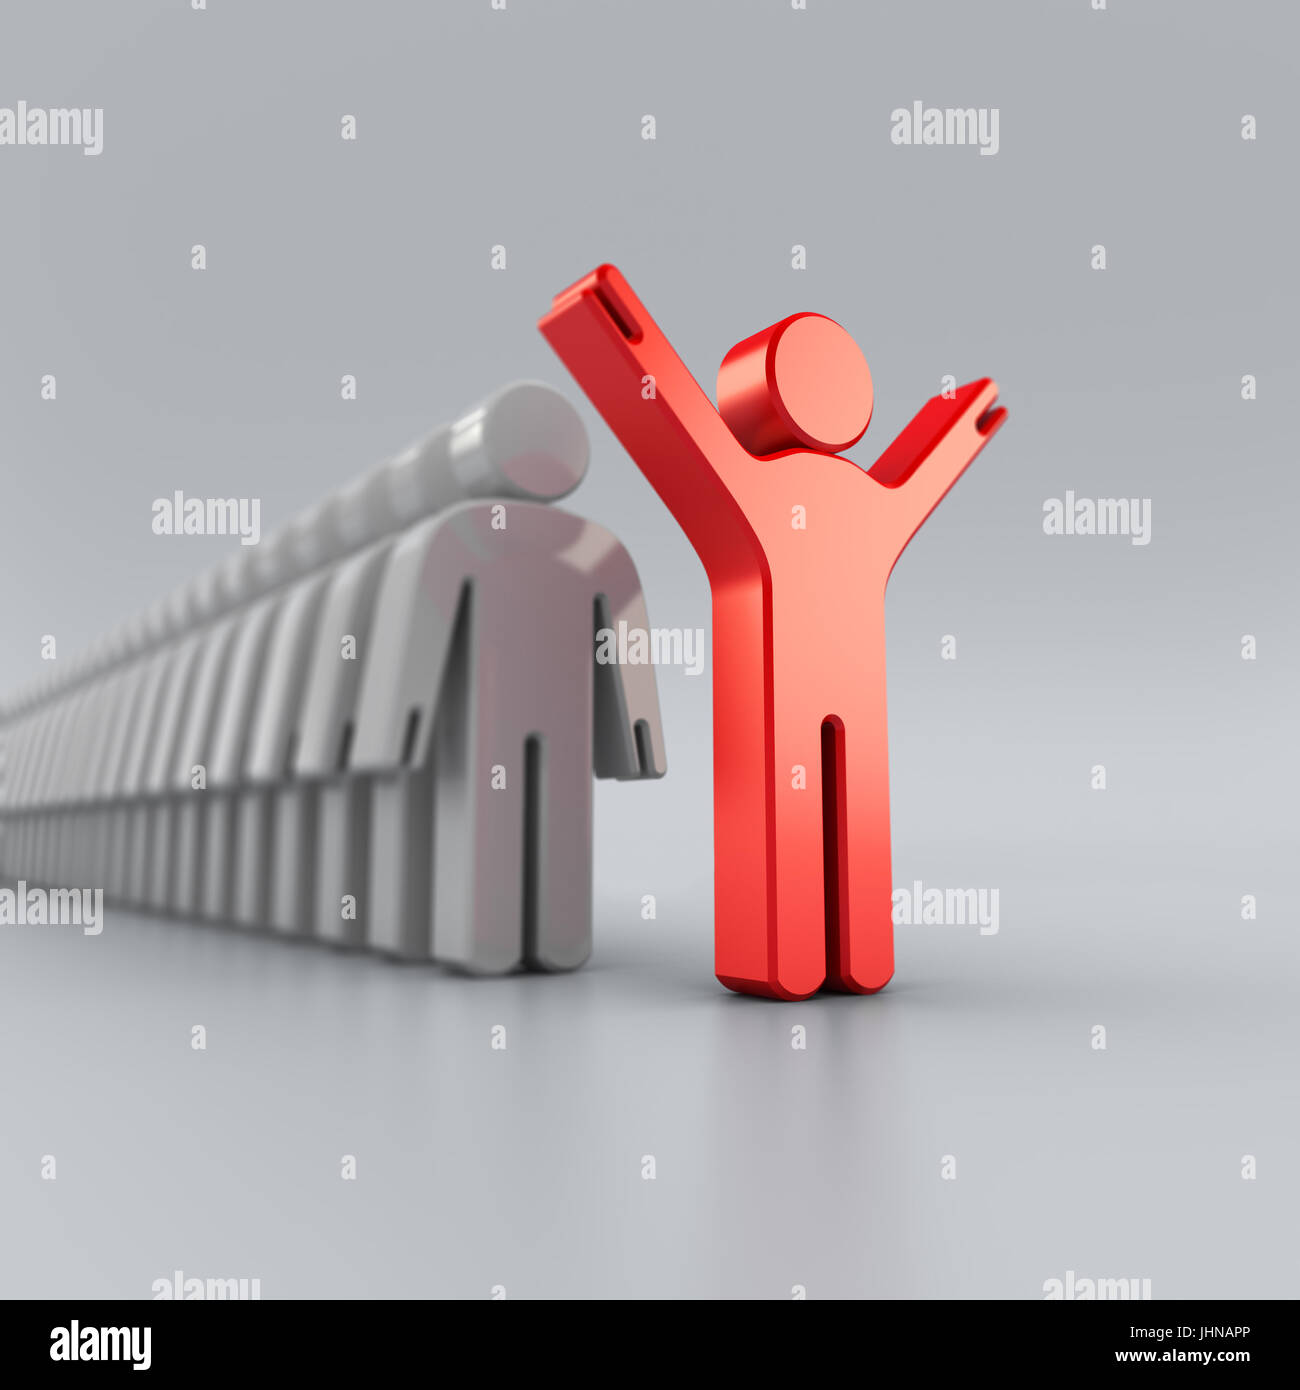 Leader man graphic background Stock Photo